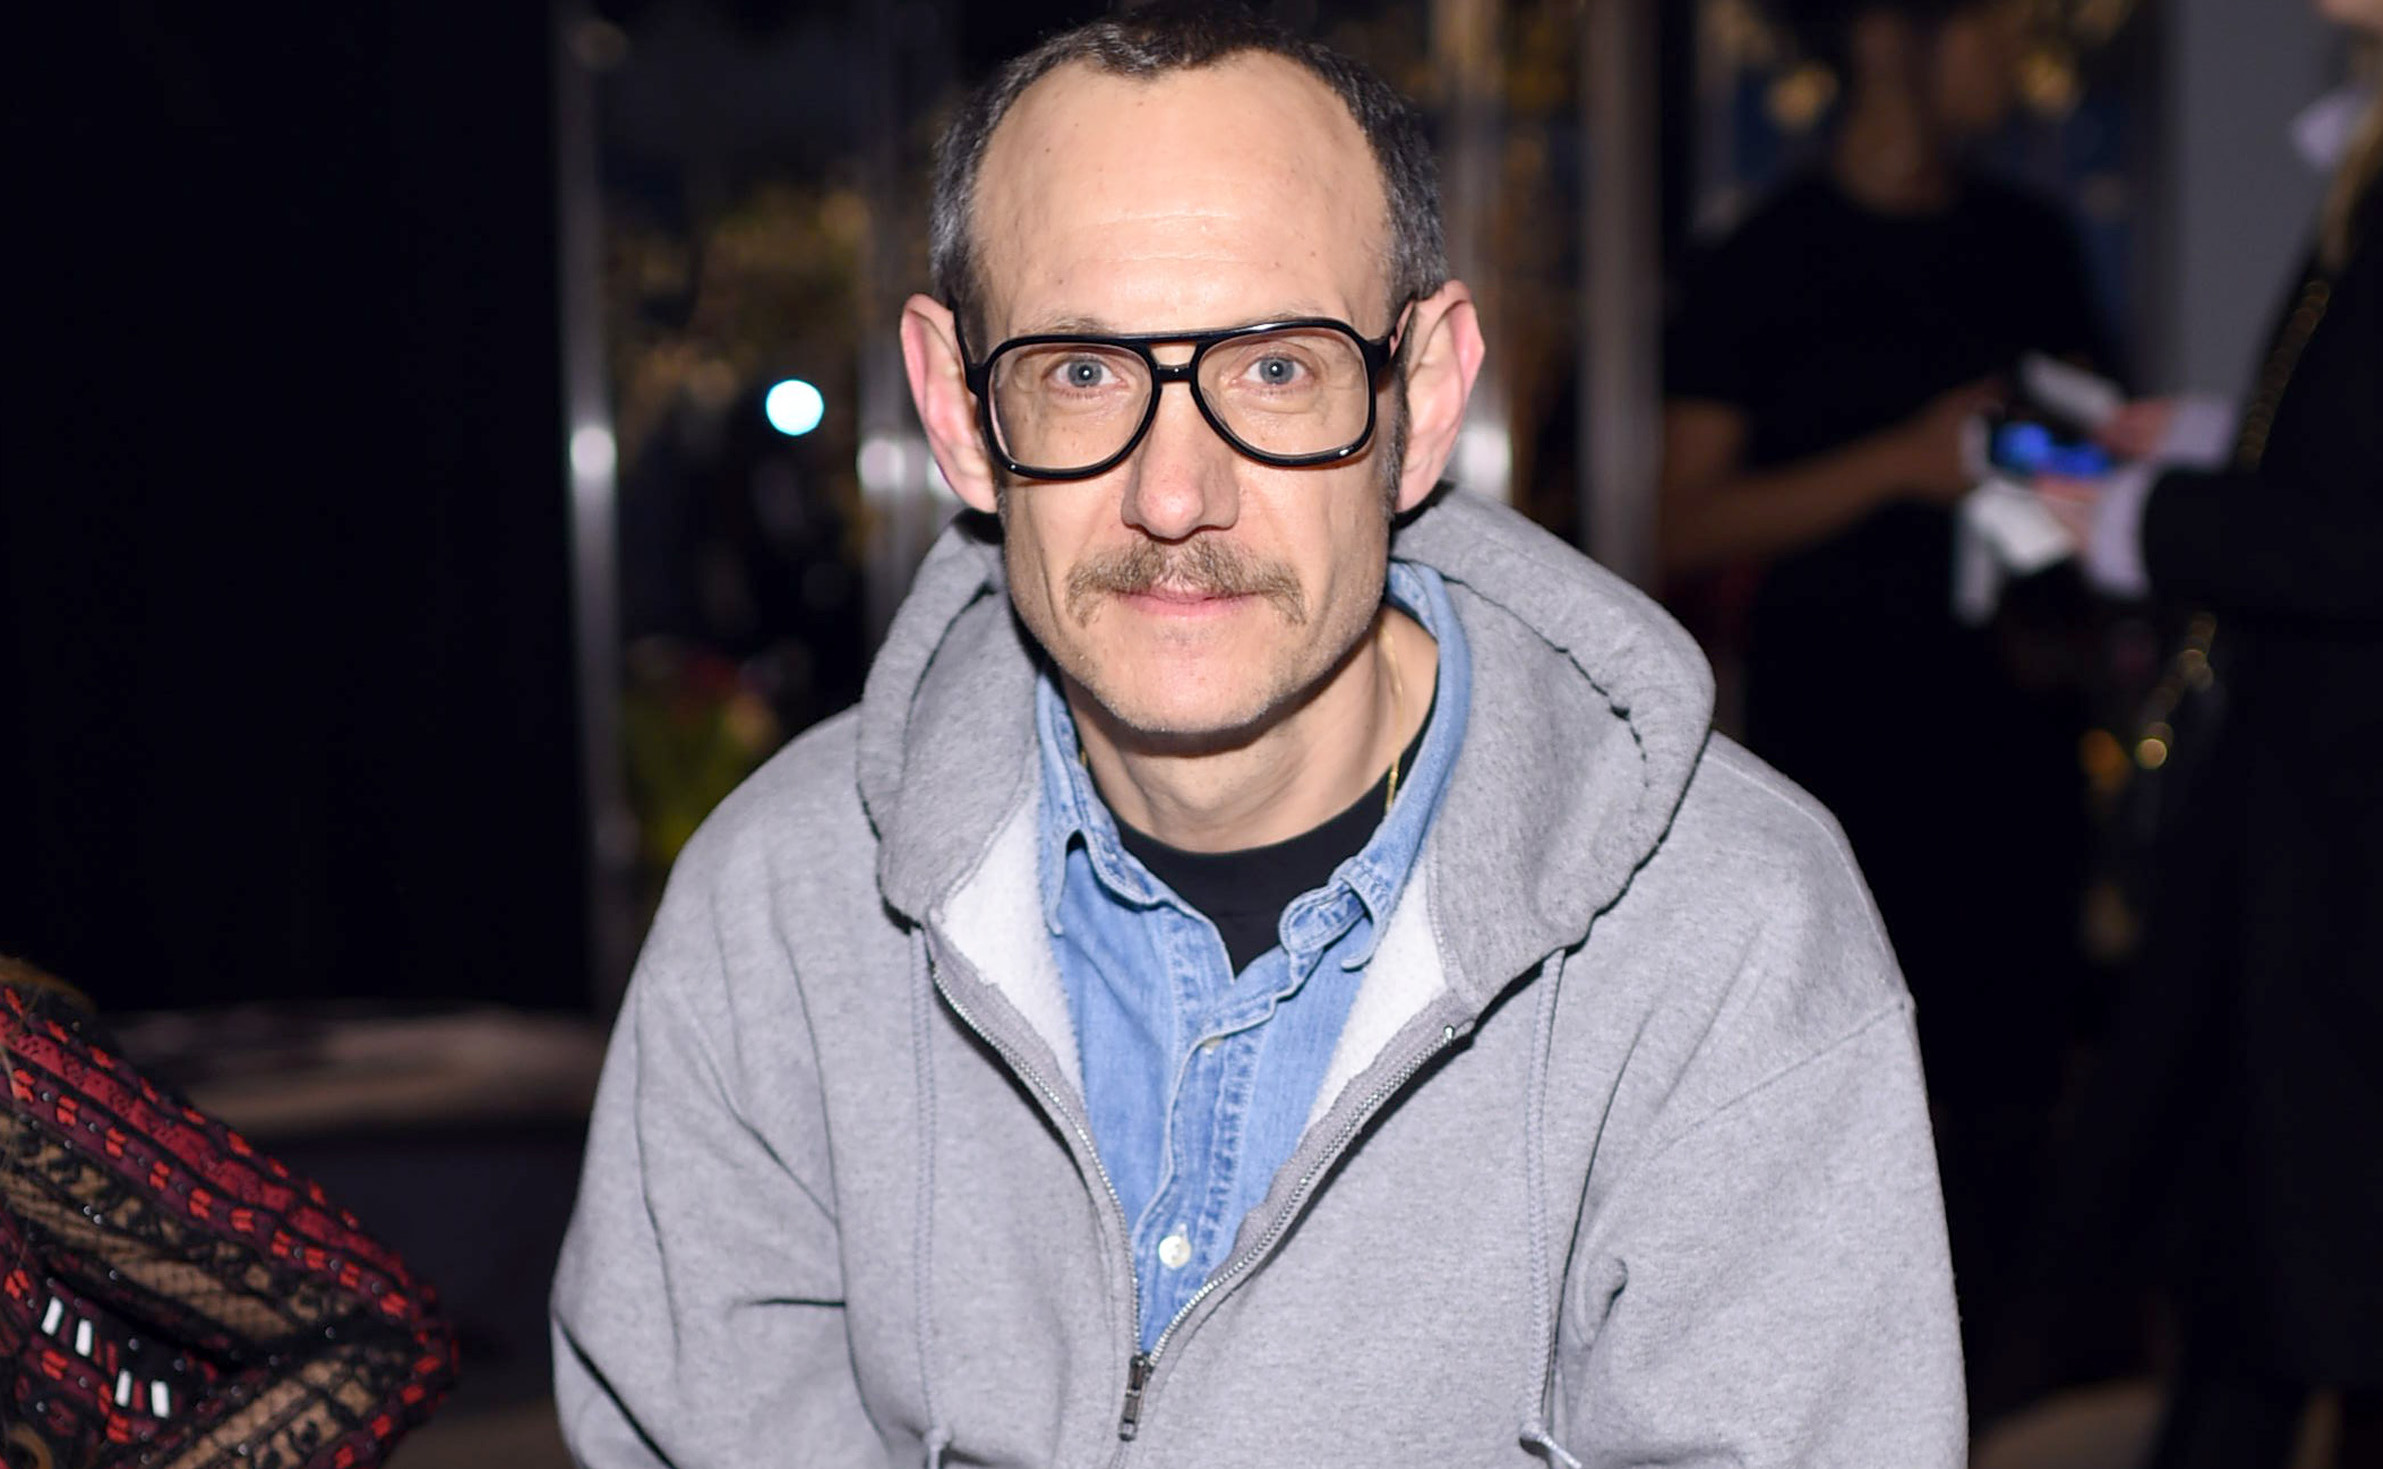 Terry Richardson Reportedly Banned From Working With Condé Nast